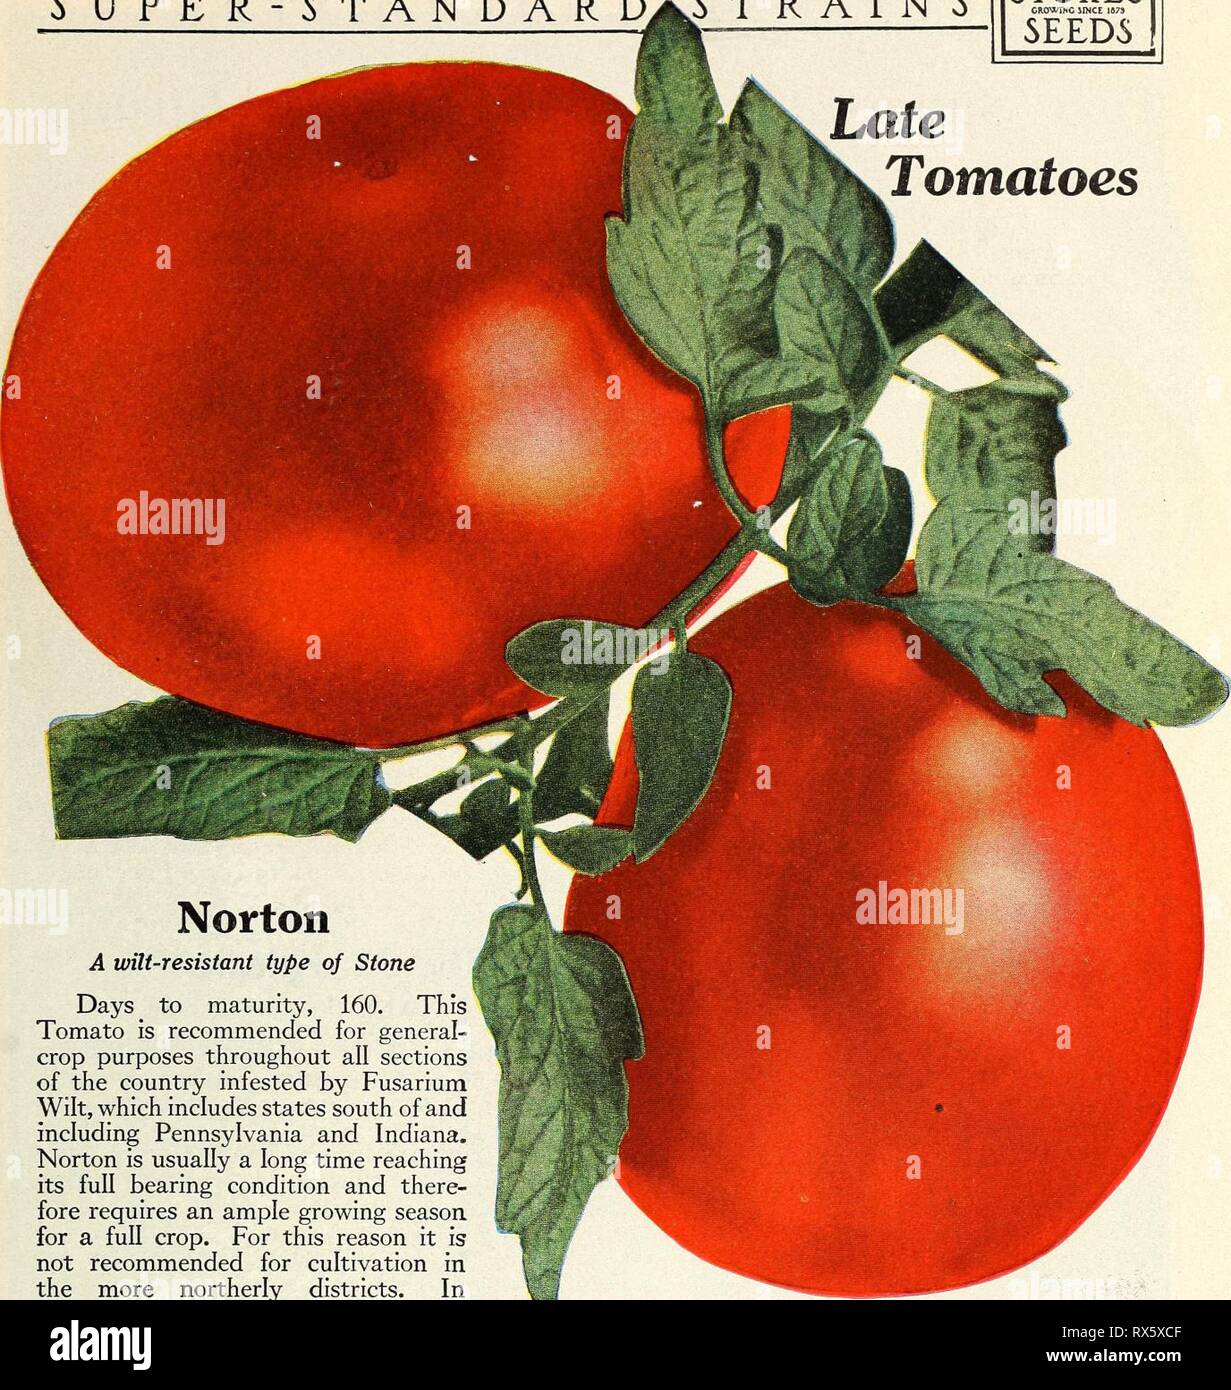 Eighty-five super-standard strains season of Eighty-five super-standard strains season of 1927 eightyfivesupers1927fran Year: 1927  STRAINS STOKES GROWIHC JINCE IS79 C T? T? T' C Late Tomatoes   A wilt-resistant type of Stone Days to maturity, 160. This Tomato is recommended for general- crop purposes throughout all sections of the country infested by Fusarium Wilt, which includes states south of and including Pennsylvania and Indiana. Norton is usually a long time reaching its full bearing condition and there- fore requires an ample growing season for a full crop. For this reason it is not r Stock Photo